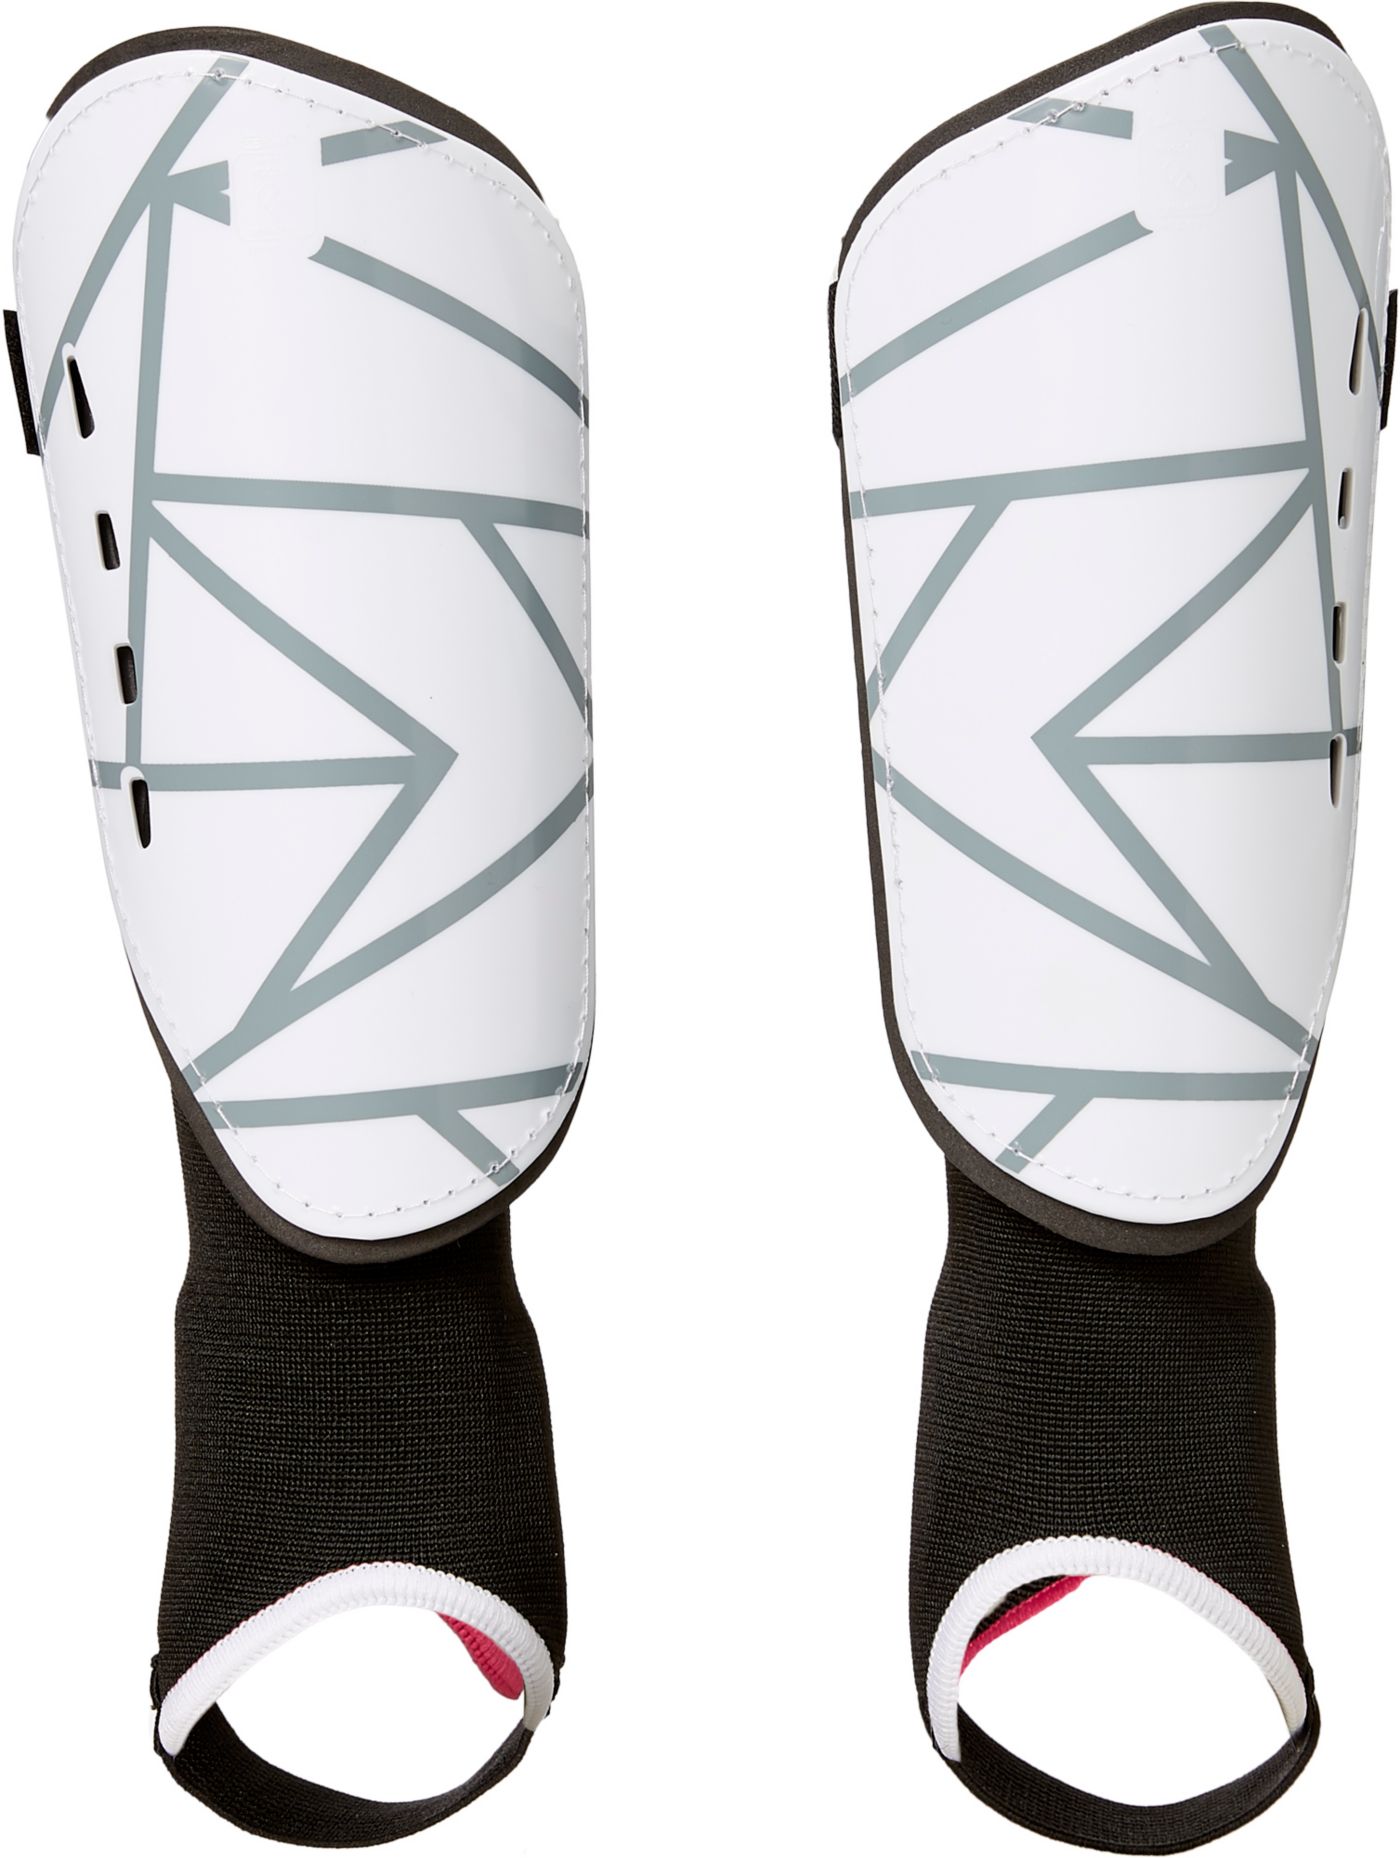 Download DSG Youth Ocala Soccer Shin Guards | DICK'S Sporting Goods